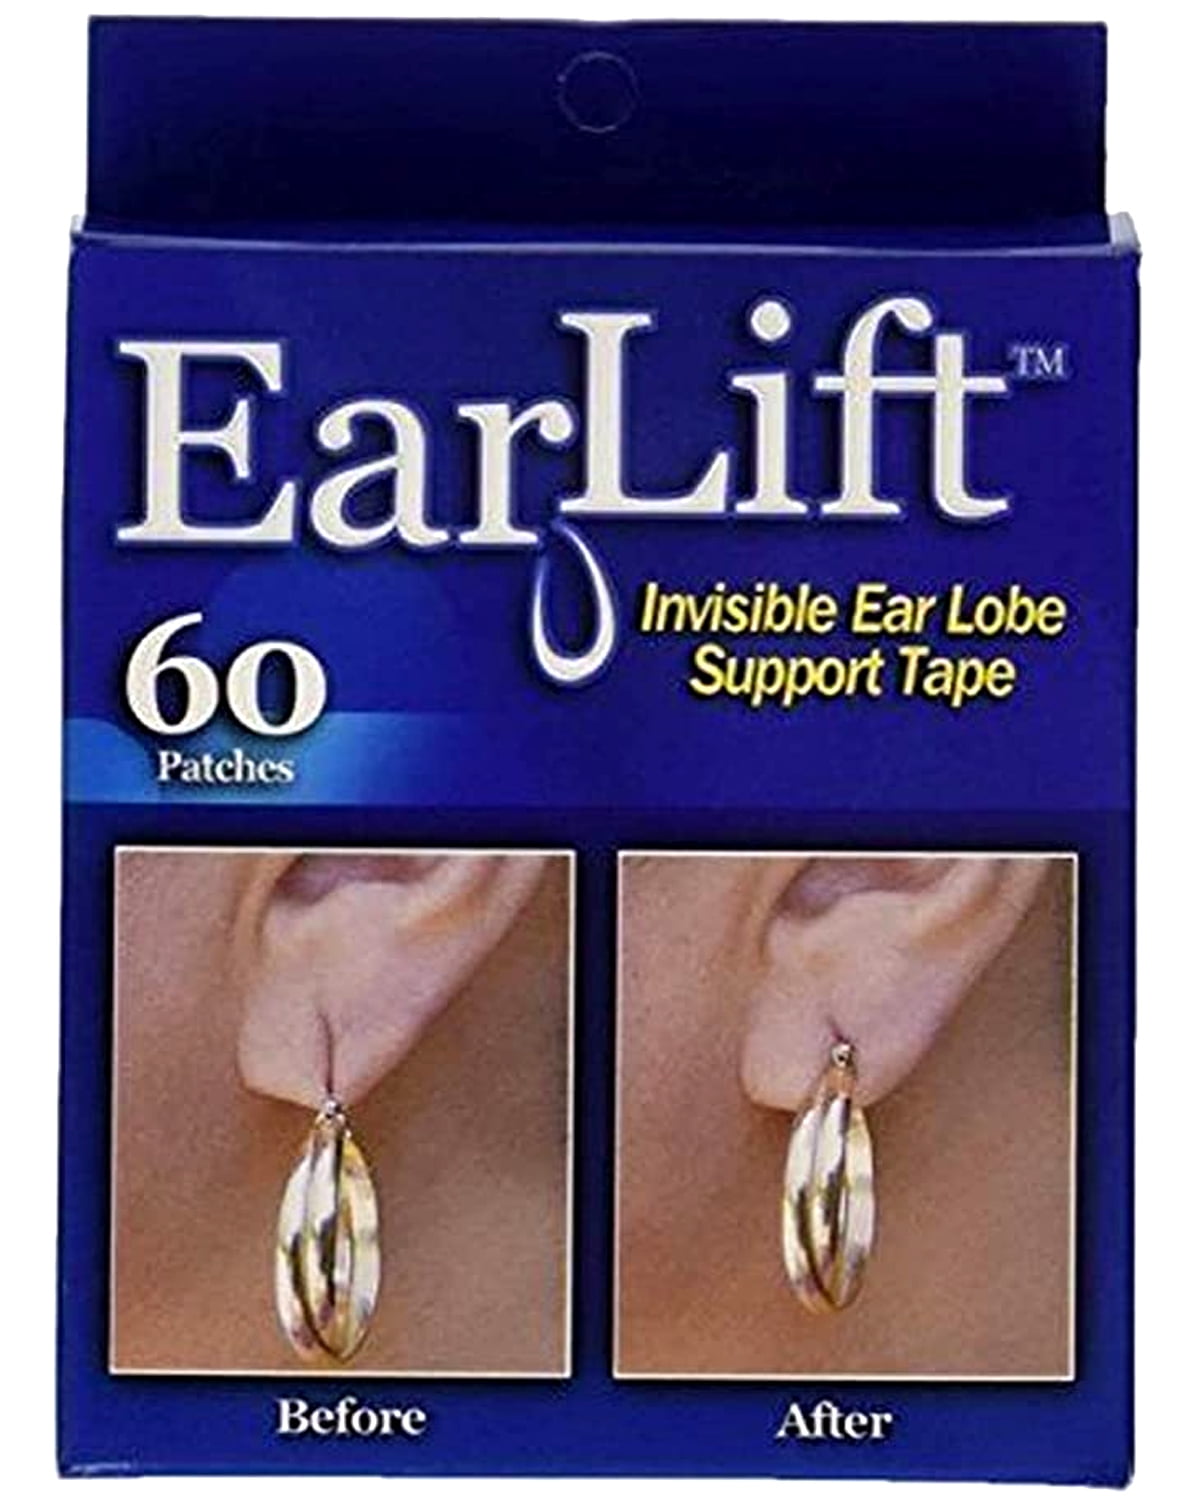  ear2ear - Invisible Ear Lobe Support Patches for Women - Makes  Wearing Earrings for Women more comfortable – Ear Care Solution for Pierced  Ears - Beauty Accessories - Pack of 30